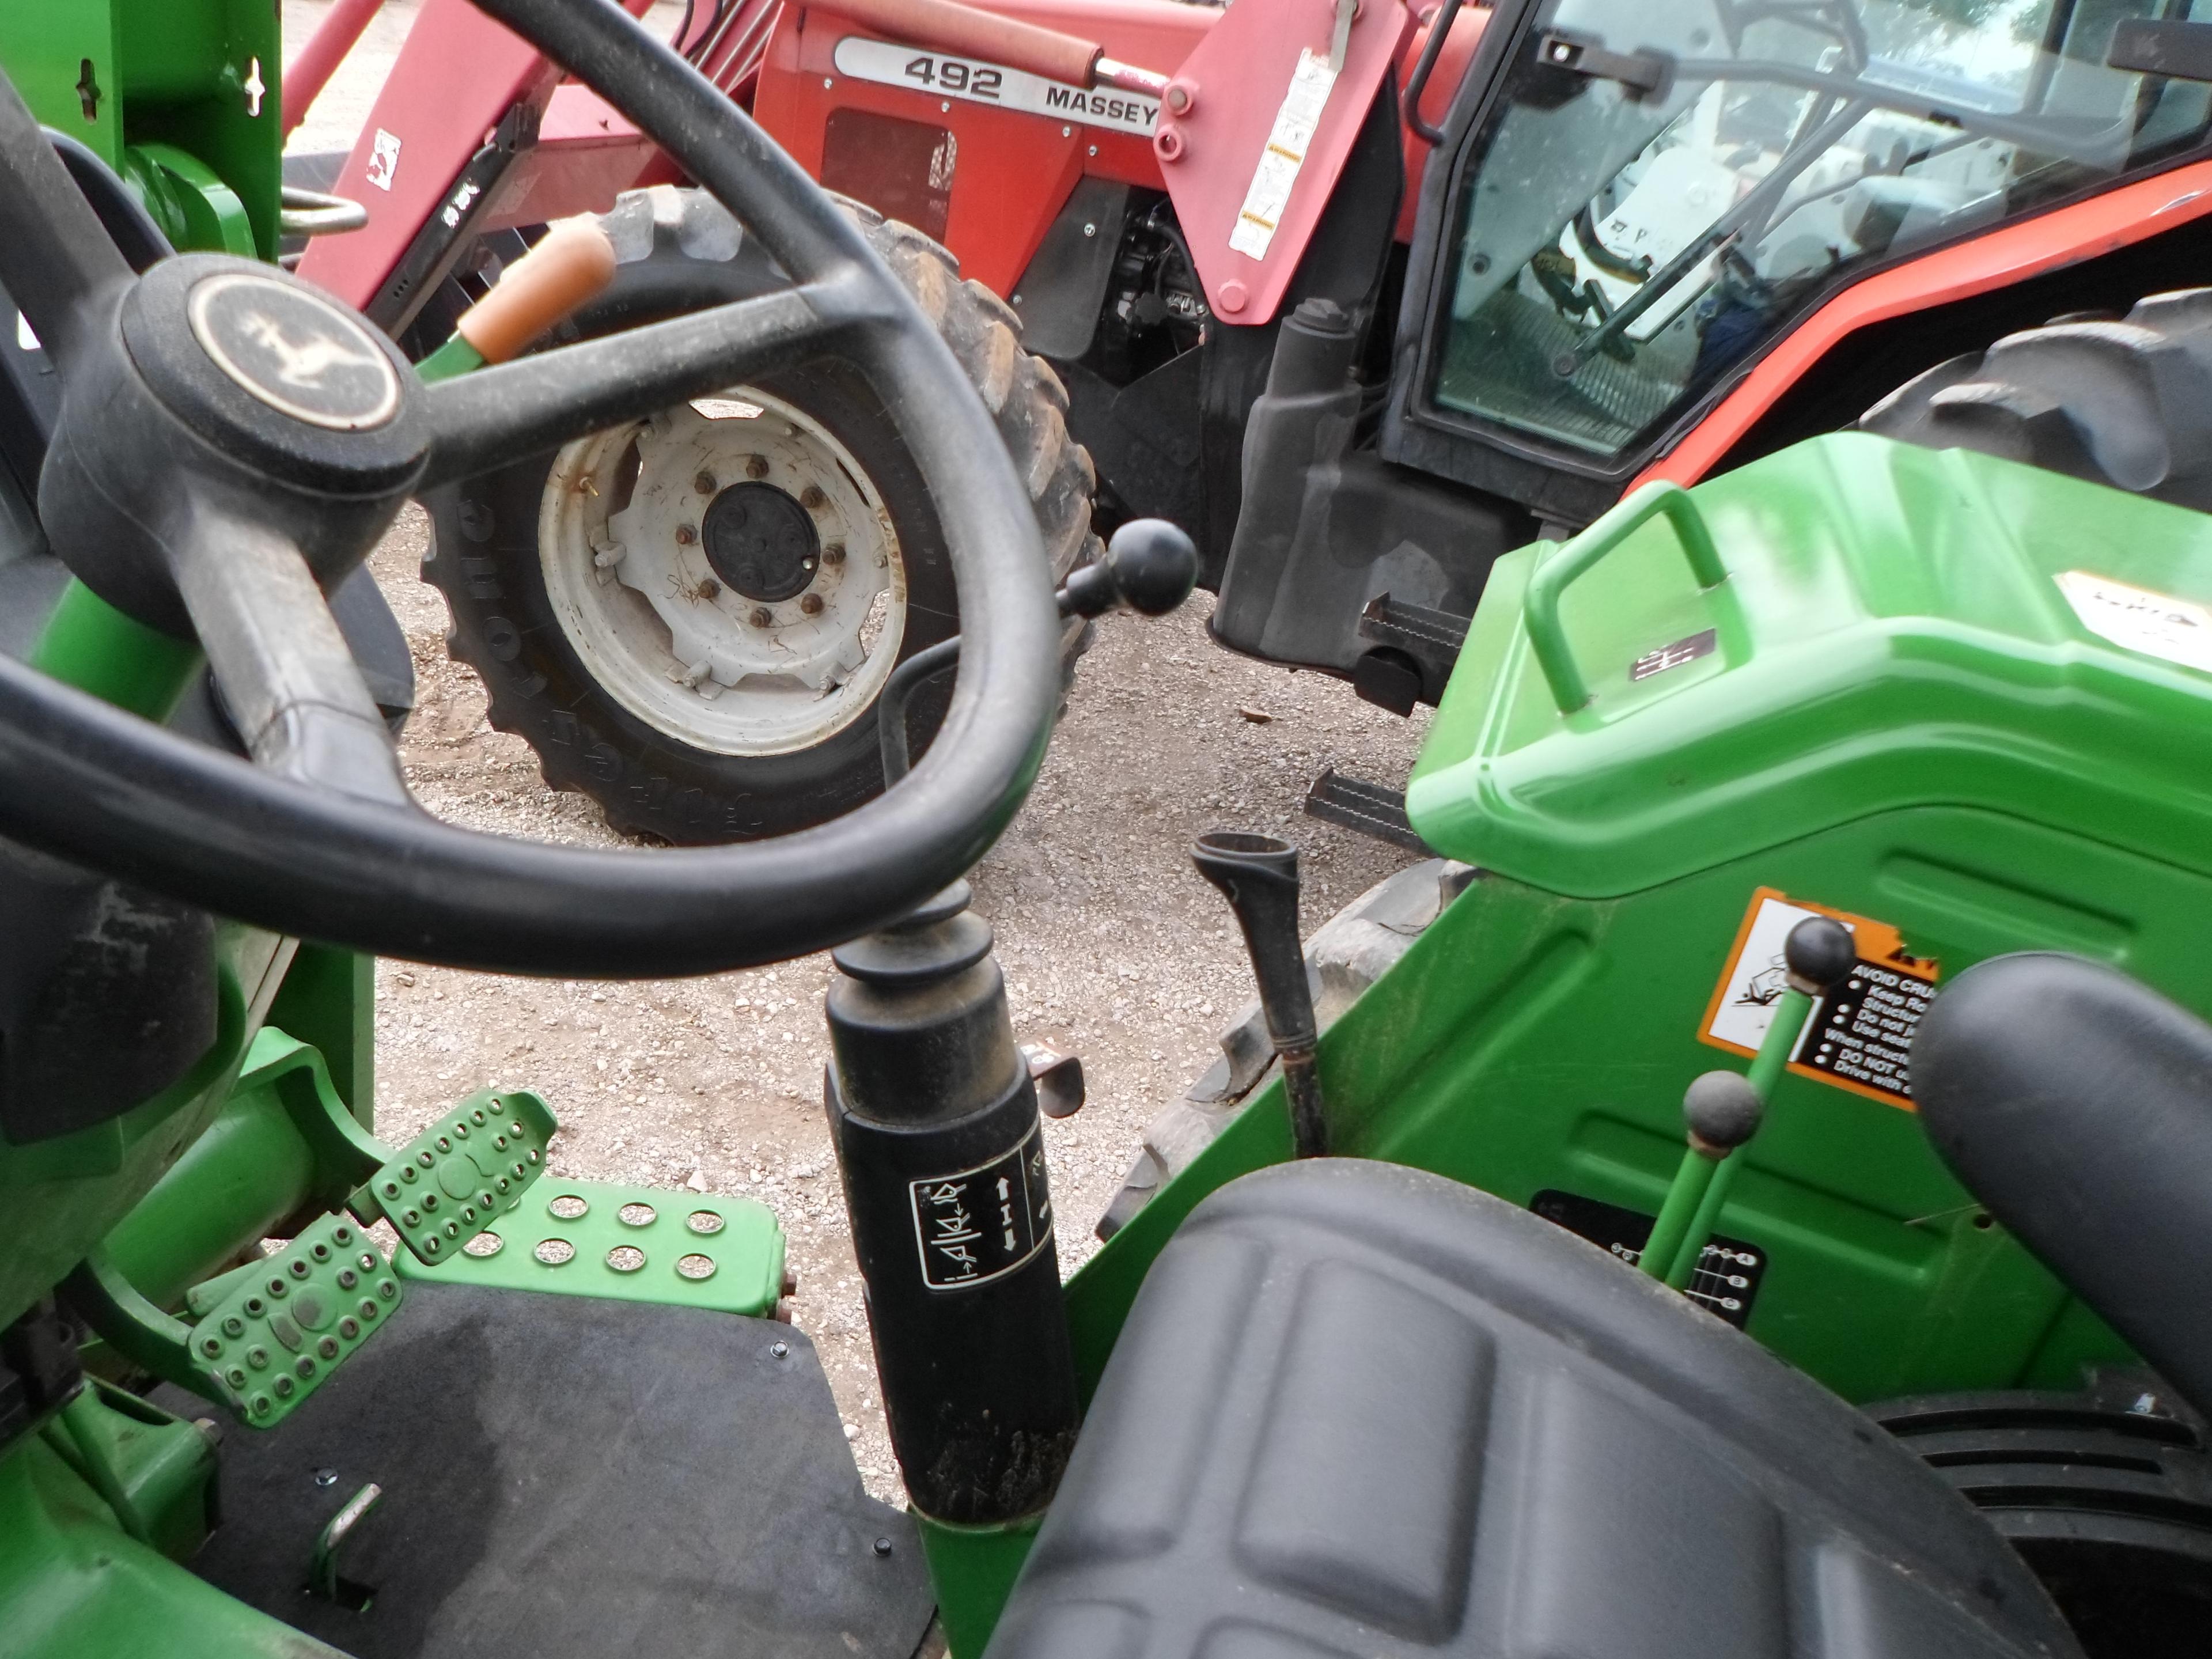 JD 5065E TRACTOR W/ JD 553 LOADER (SERIAL # 1PY5065EVBB006381) (SHOWING APPX 1,022 HOURS, UP TO THE